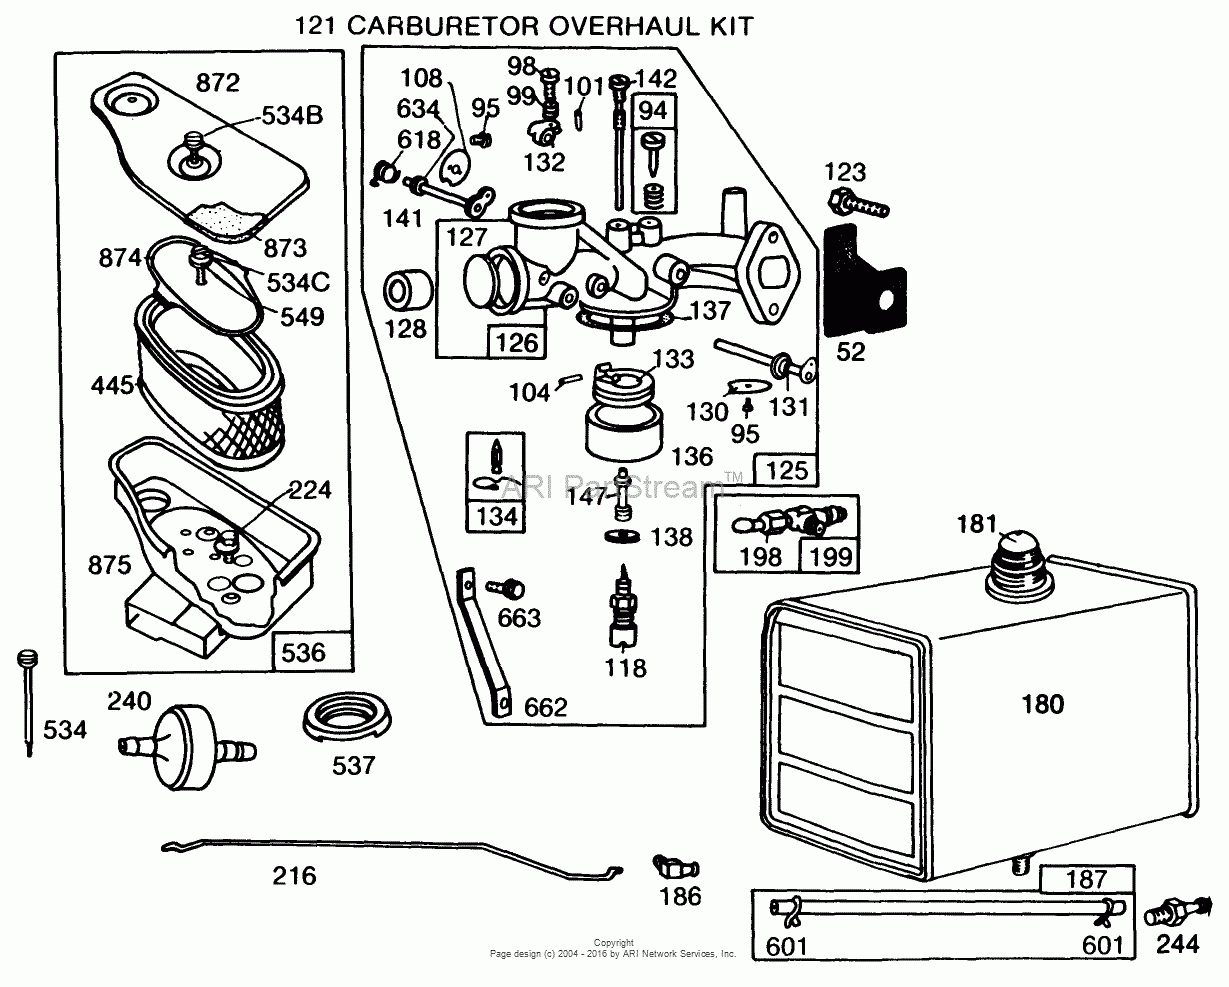 8 Hp Briggs And Stratton Coil Wiring Diagram | Wiring Diagram - Briggs And Stratton Coil Wiring Diagram